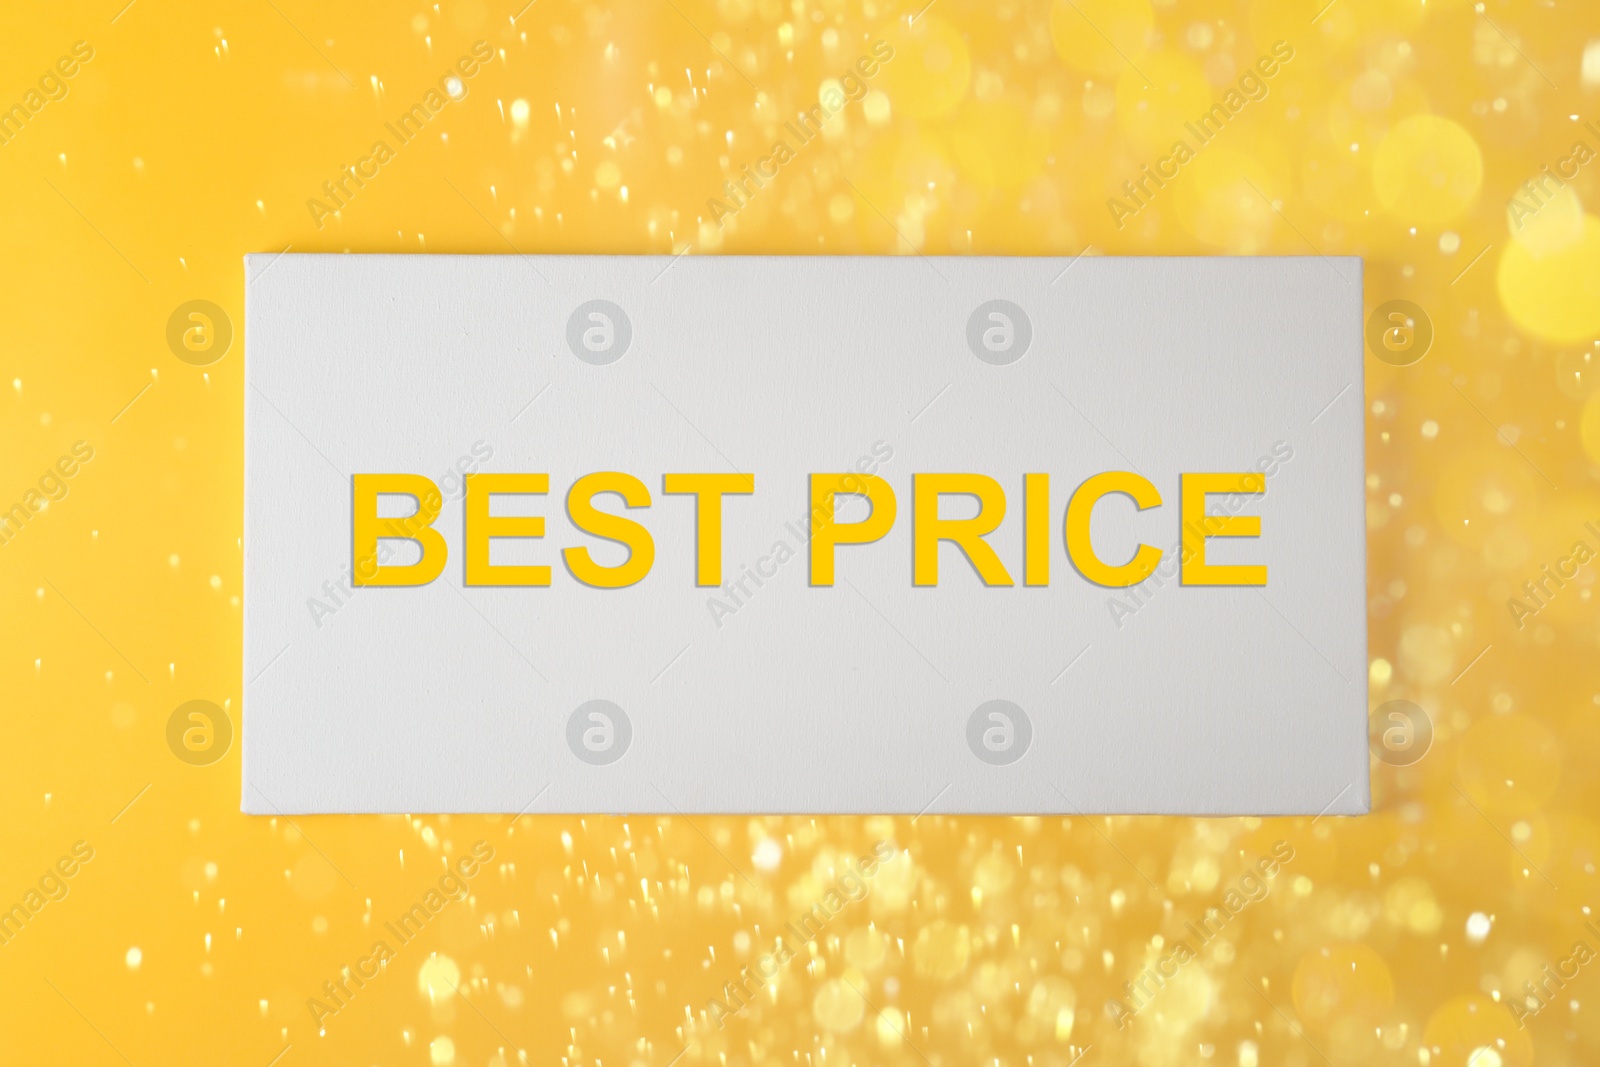 Image of Canvas with phrase Best Price on yellow background with blurred lights